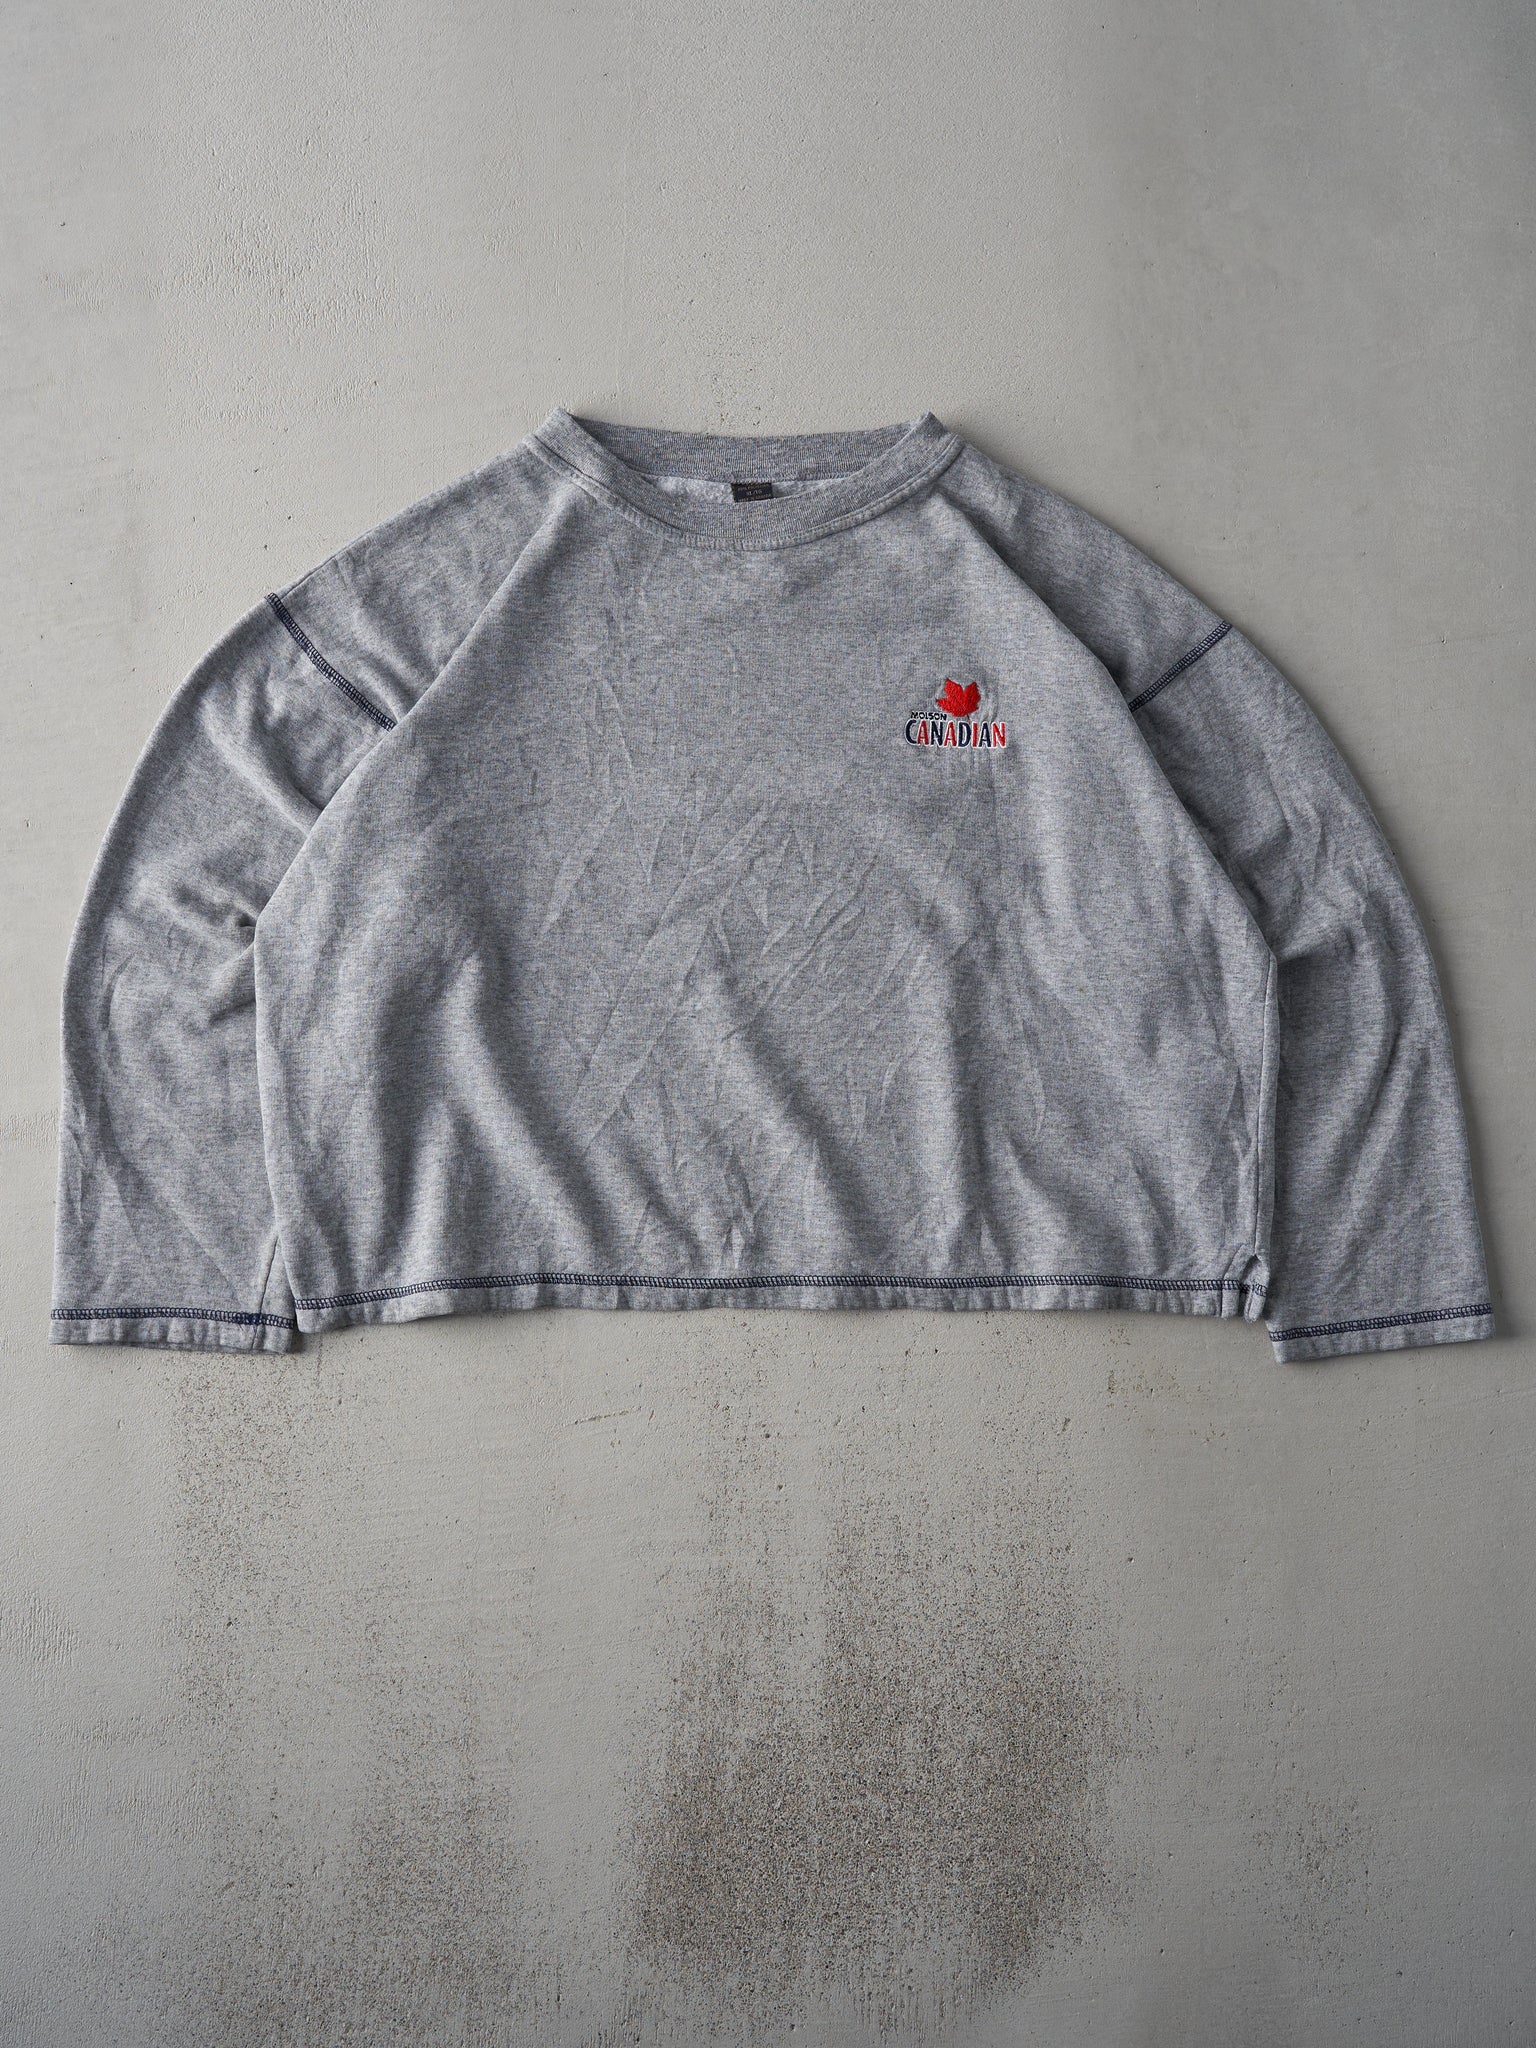 Vintage 90s Grey Embroidered Molson Canadian Cropped Crewneck (XL)